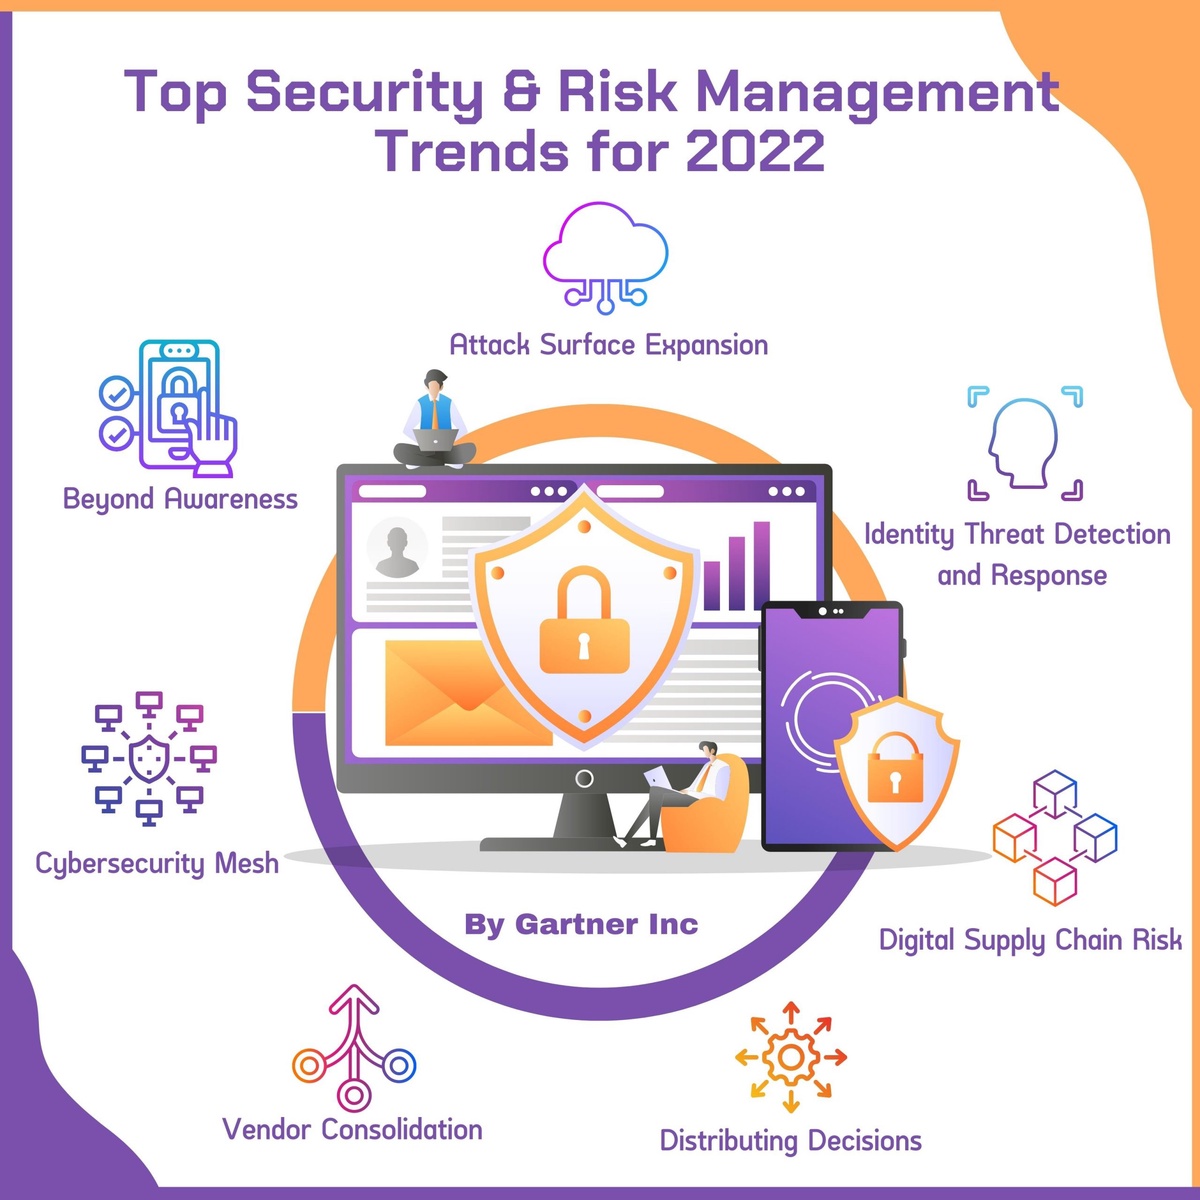 Gartner Identifies Top Security and Risk Management Trends for 2022